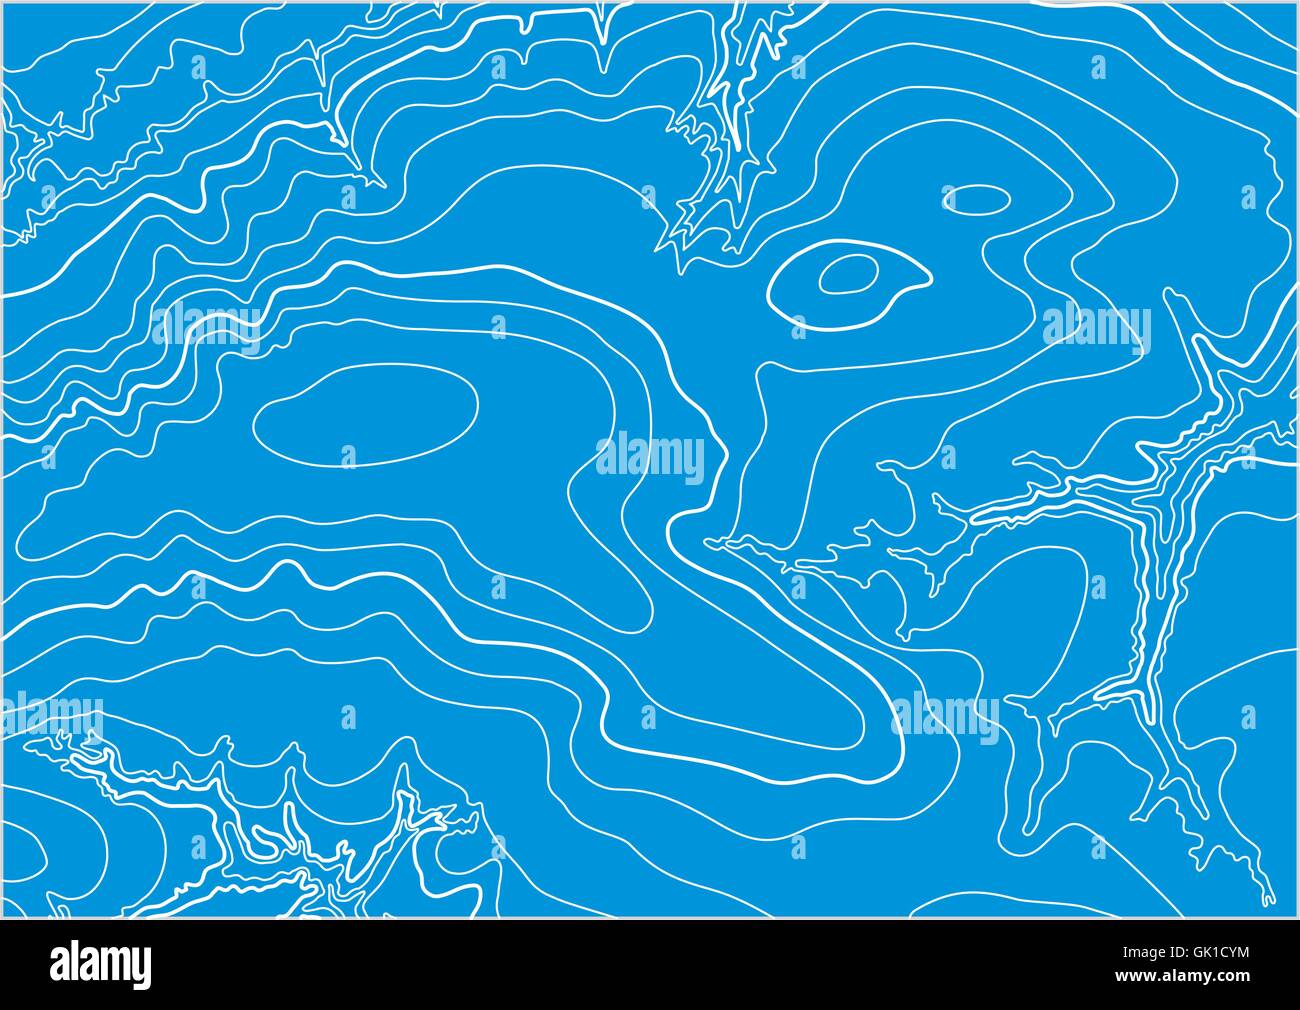 Abstract vector topographic map in blue colors Stock Vector